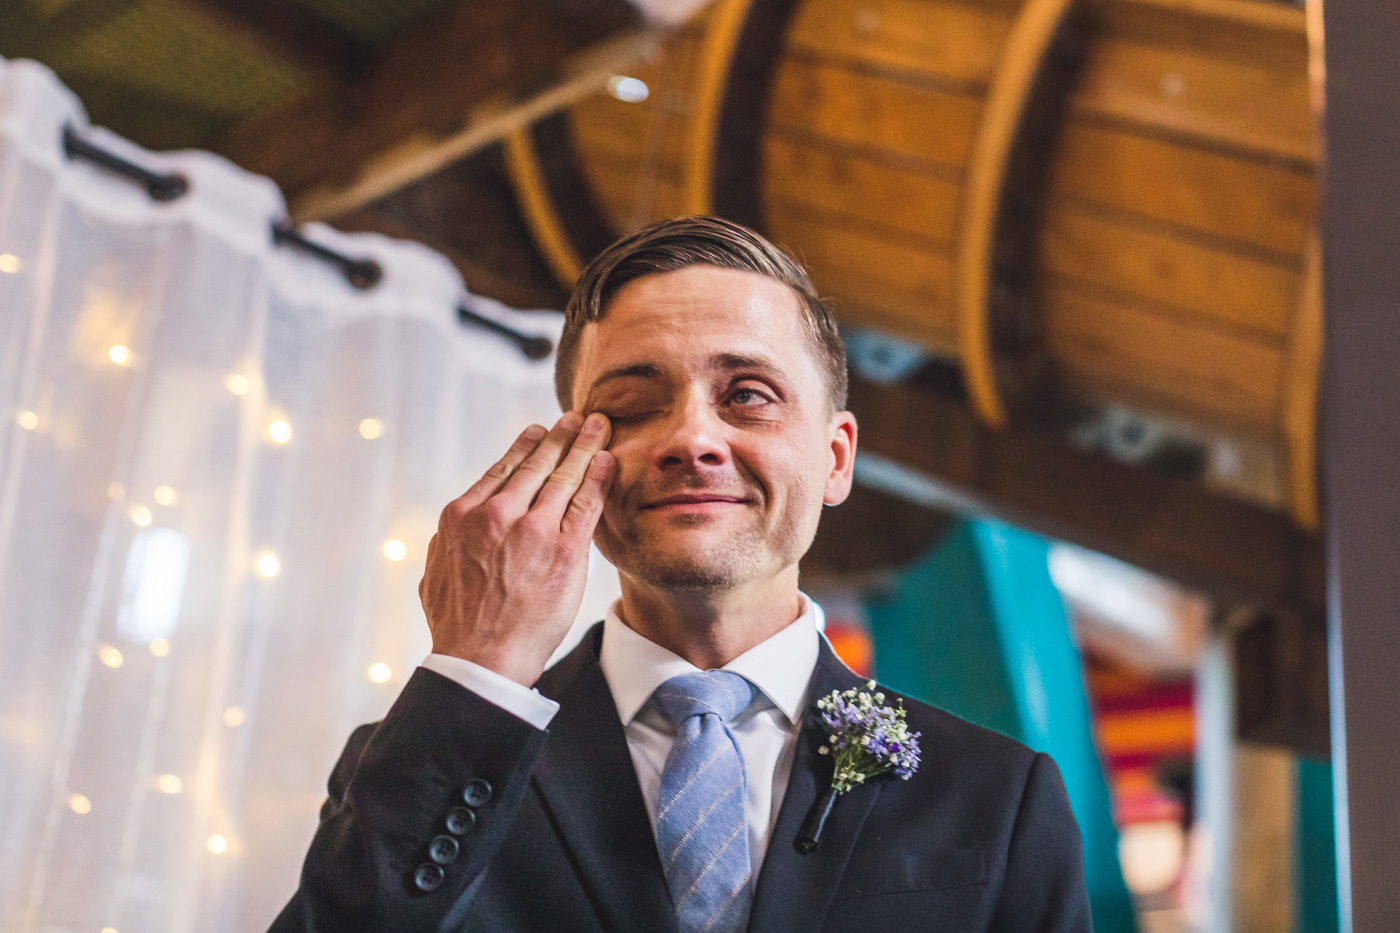 groom-getting-teary-at-wedding-ceremony